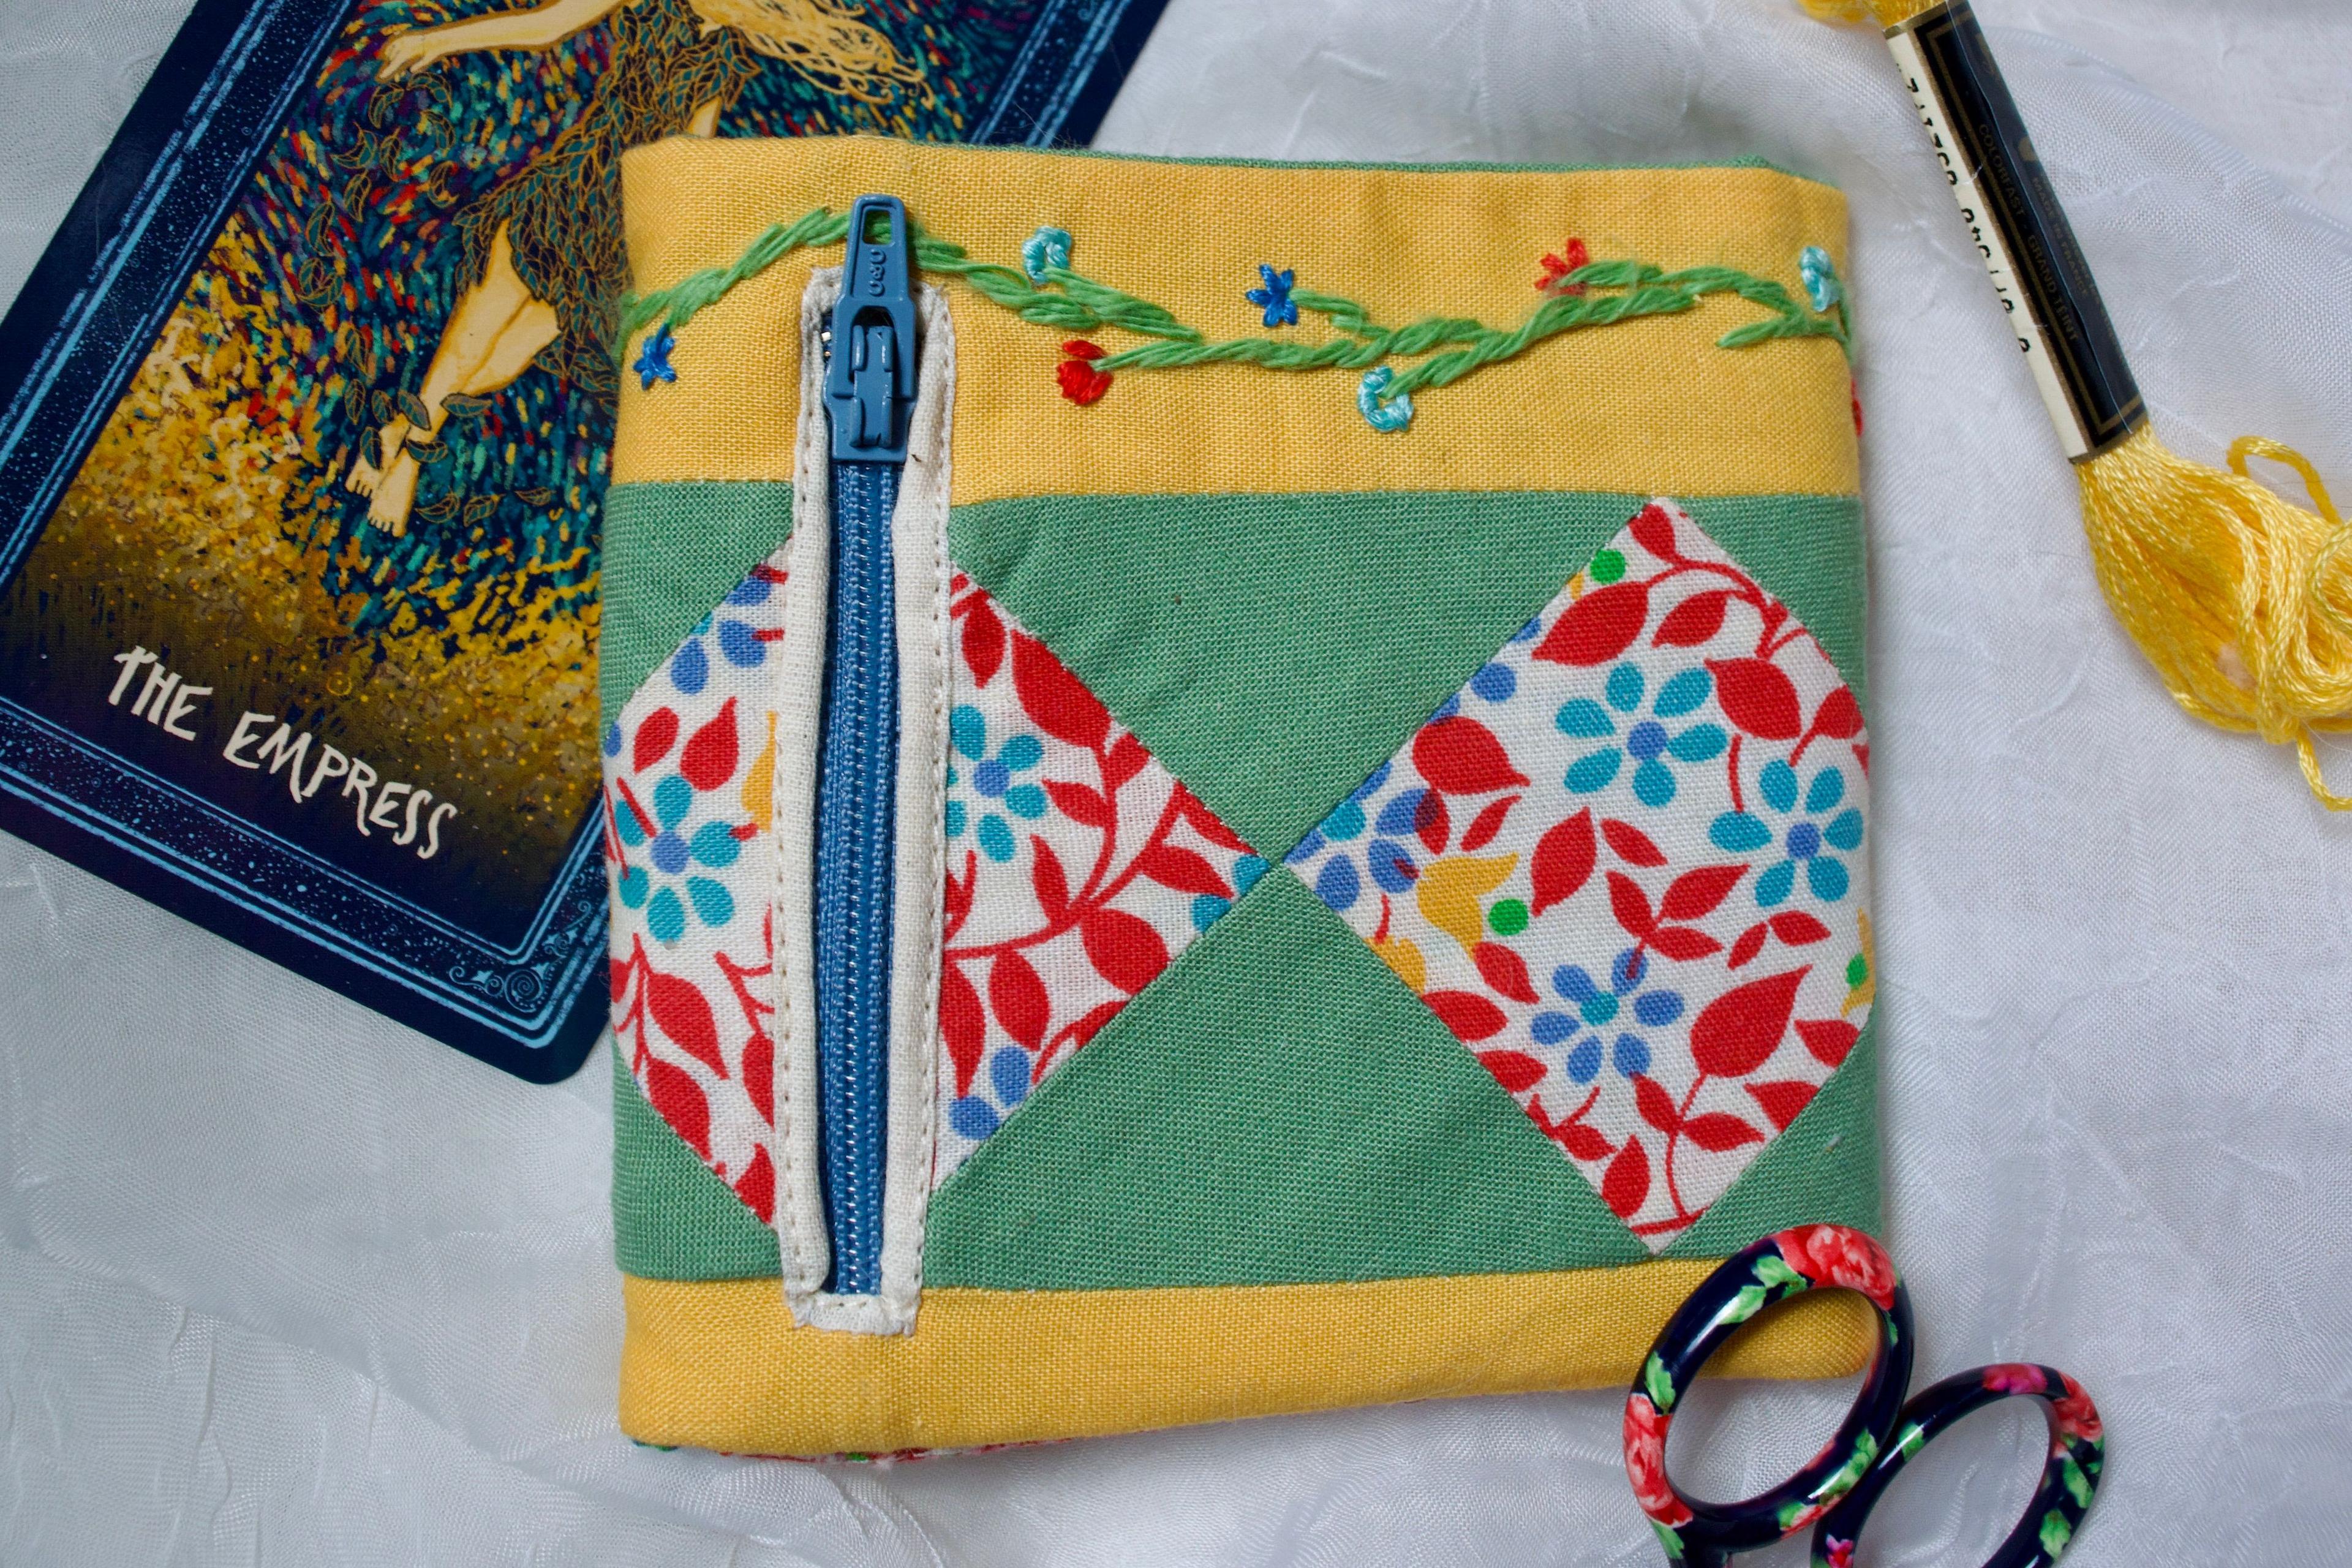 A fabric wallet with floral embroidery sits on a white piece of fabric. The wallet is mostly yellow and green, with diamonds of a floral fabric that has red, yellow, and blue flowers. The zipper for a small coin pocket is visible and also blue. There is The Empress tarot card, yellow embroidery floss, and a small pair of scissors also visible. 